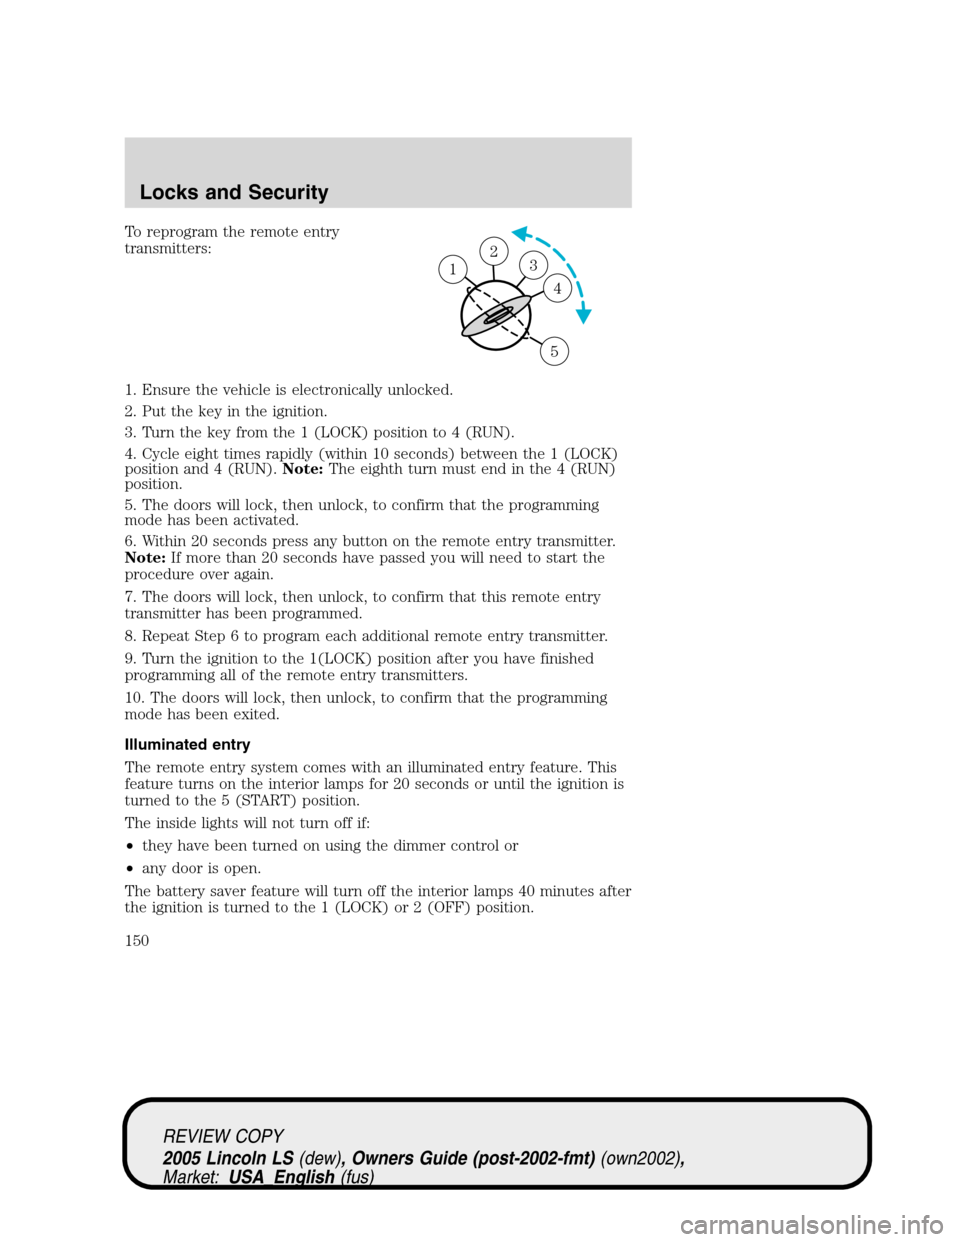 LINCOLN LS 2005  Owners Manual To reprogram the remote entry
transmitters:
1. Ensure the vehicle is electronically unlocked.
2. Put the key in the ignition.
3. Turn the key from the 1 (LOCK) position to 4 (RUN).
4. Cycle eight time